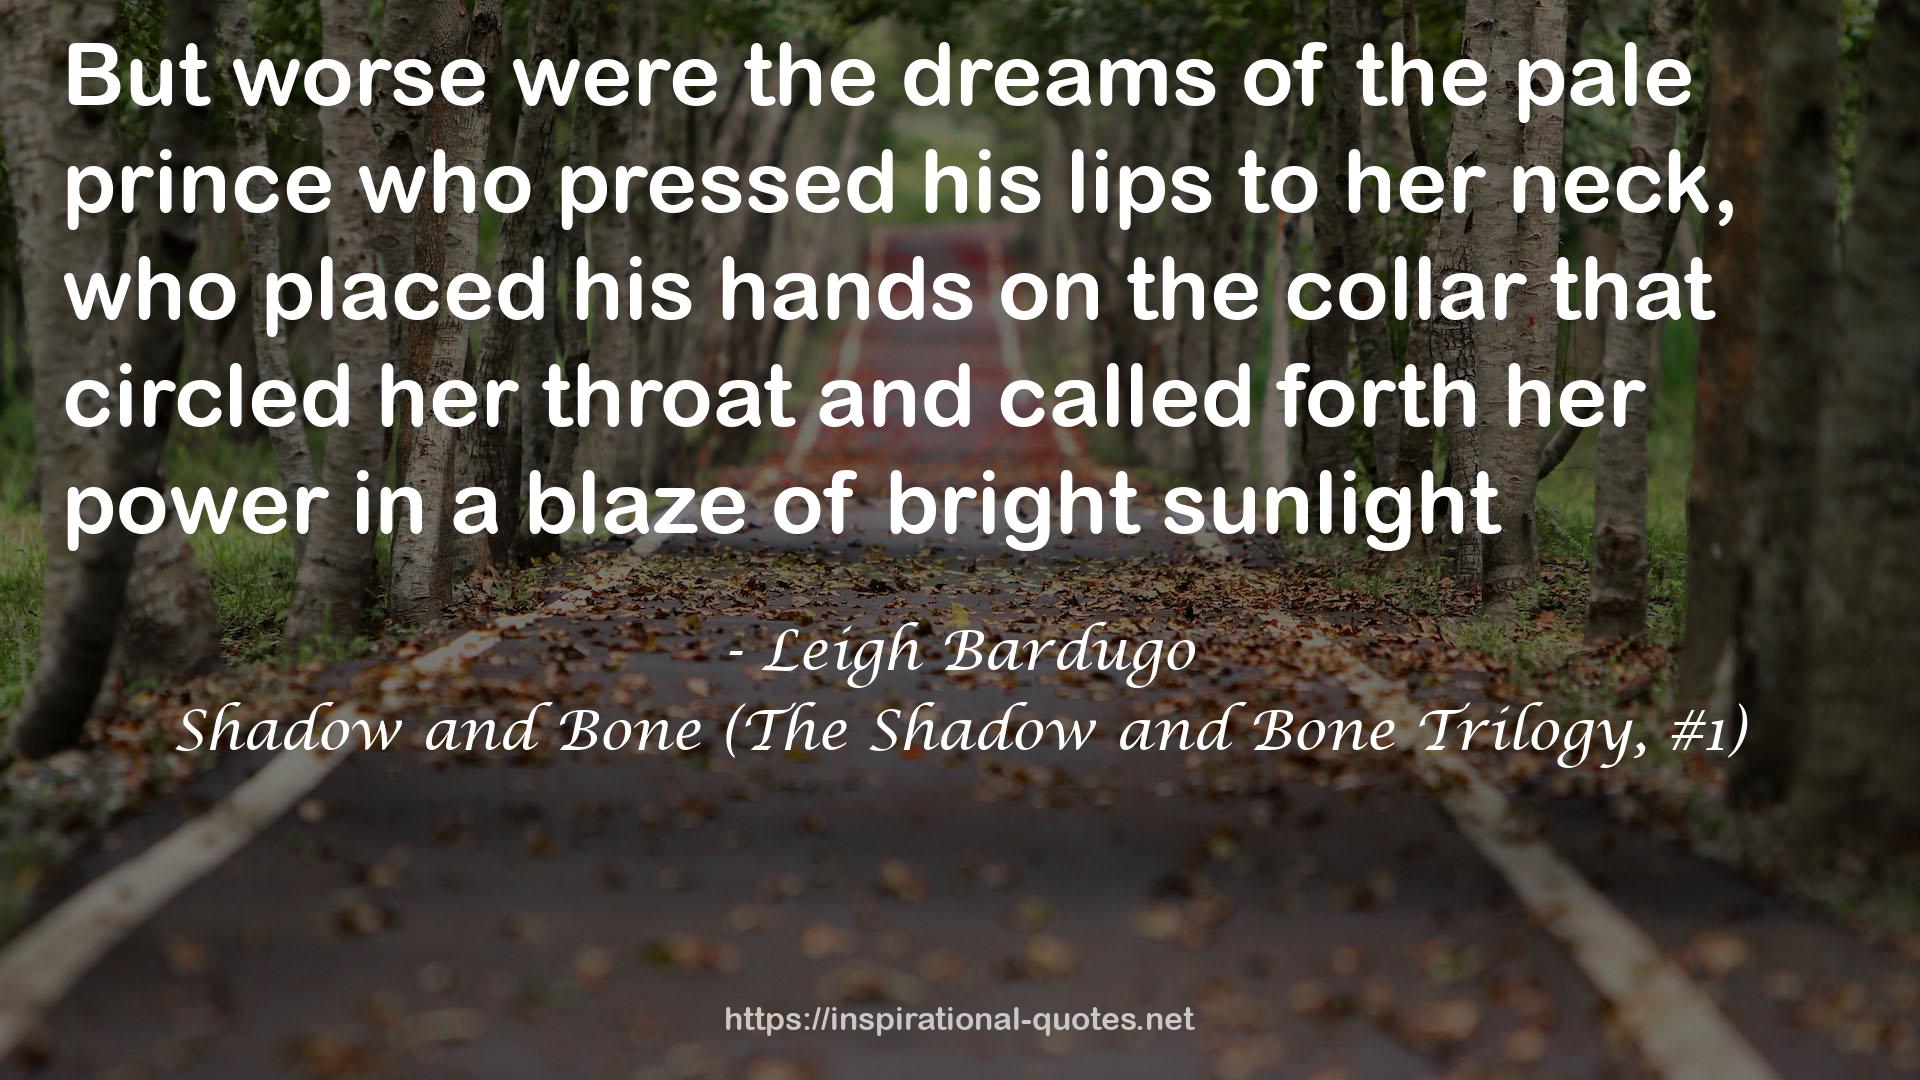 Shadow and Bone (The Shadow and Bone Trilogy, #1) QUOTES